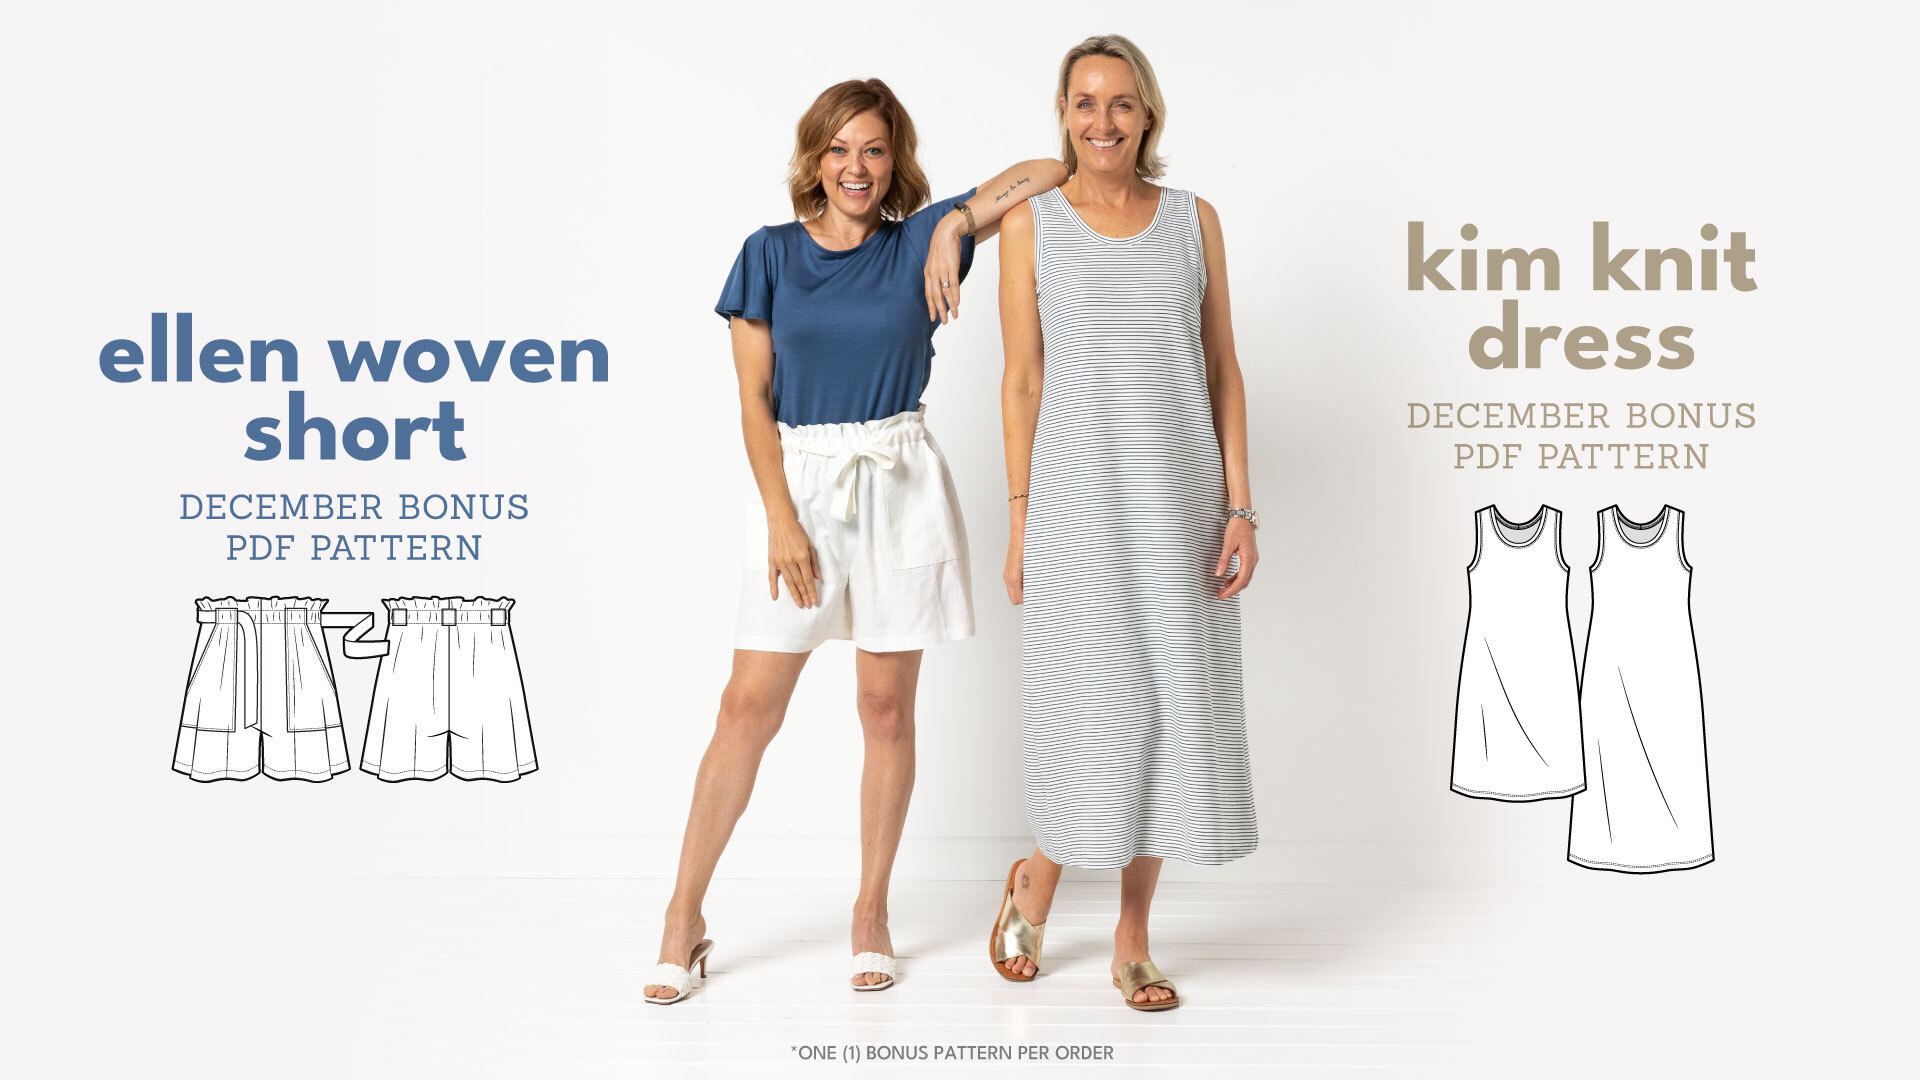 Which will you choose - Kim Knit Dress or Ellen Woven Short?